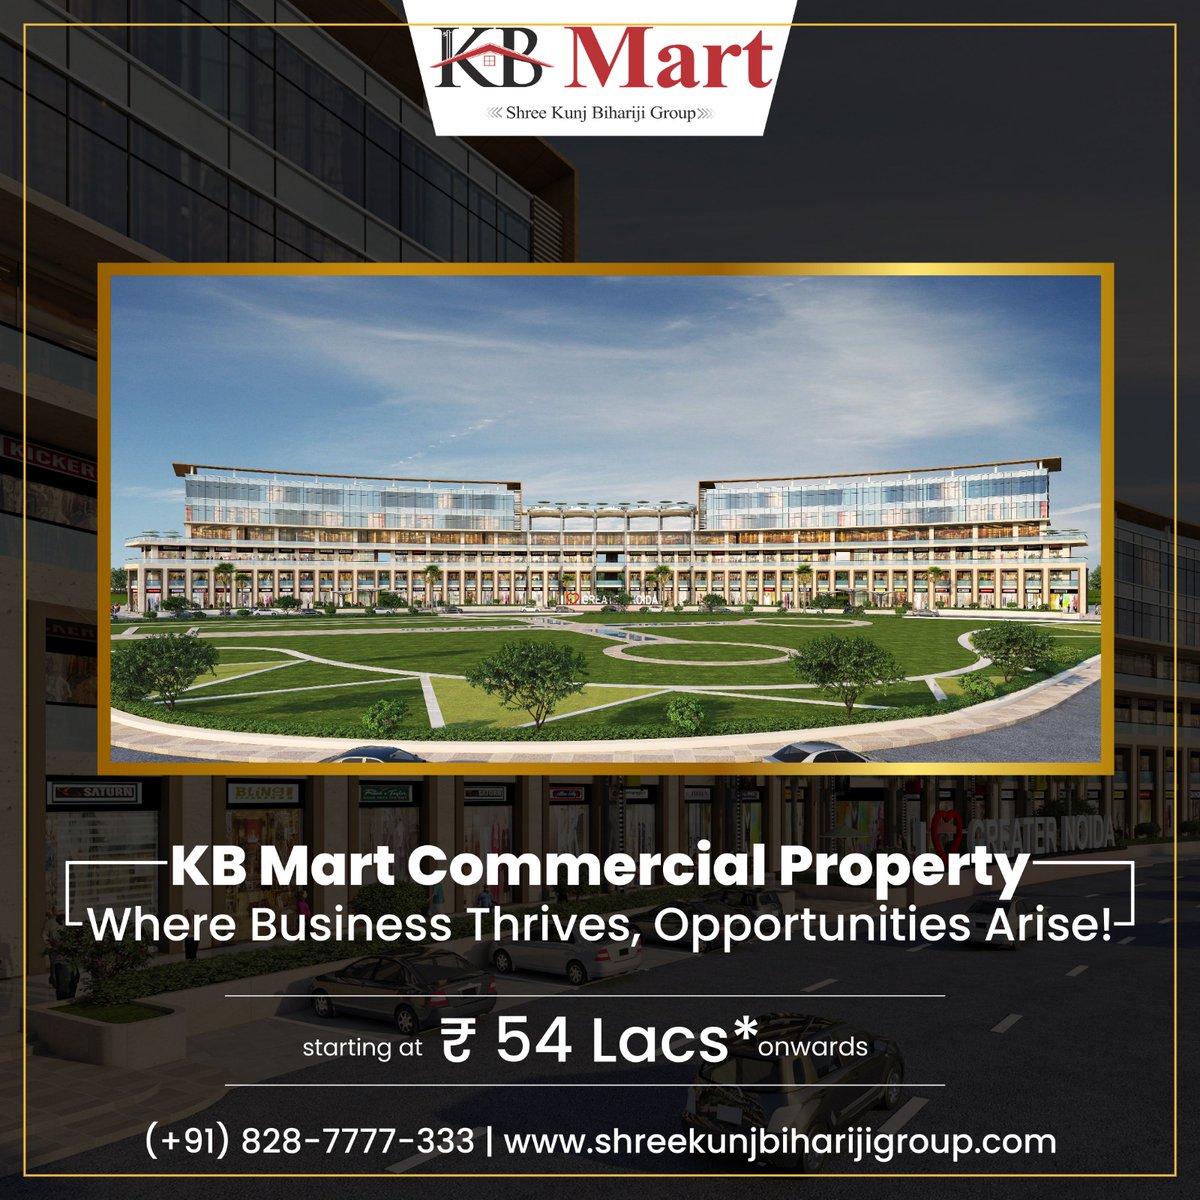 Embrace the Extraordinary at KB MART- Commercial Property!🎭

Contact Us Today and Take Your Business to New Heights.
📞828-7777-333
📍Greater Noida, Front of Expo Mart

#LuxeLiving #UnmatchedElegance #YourDreamSpace